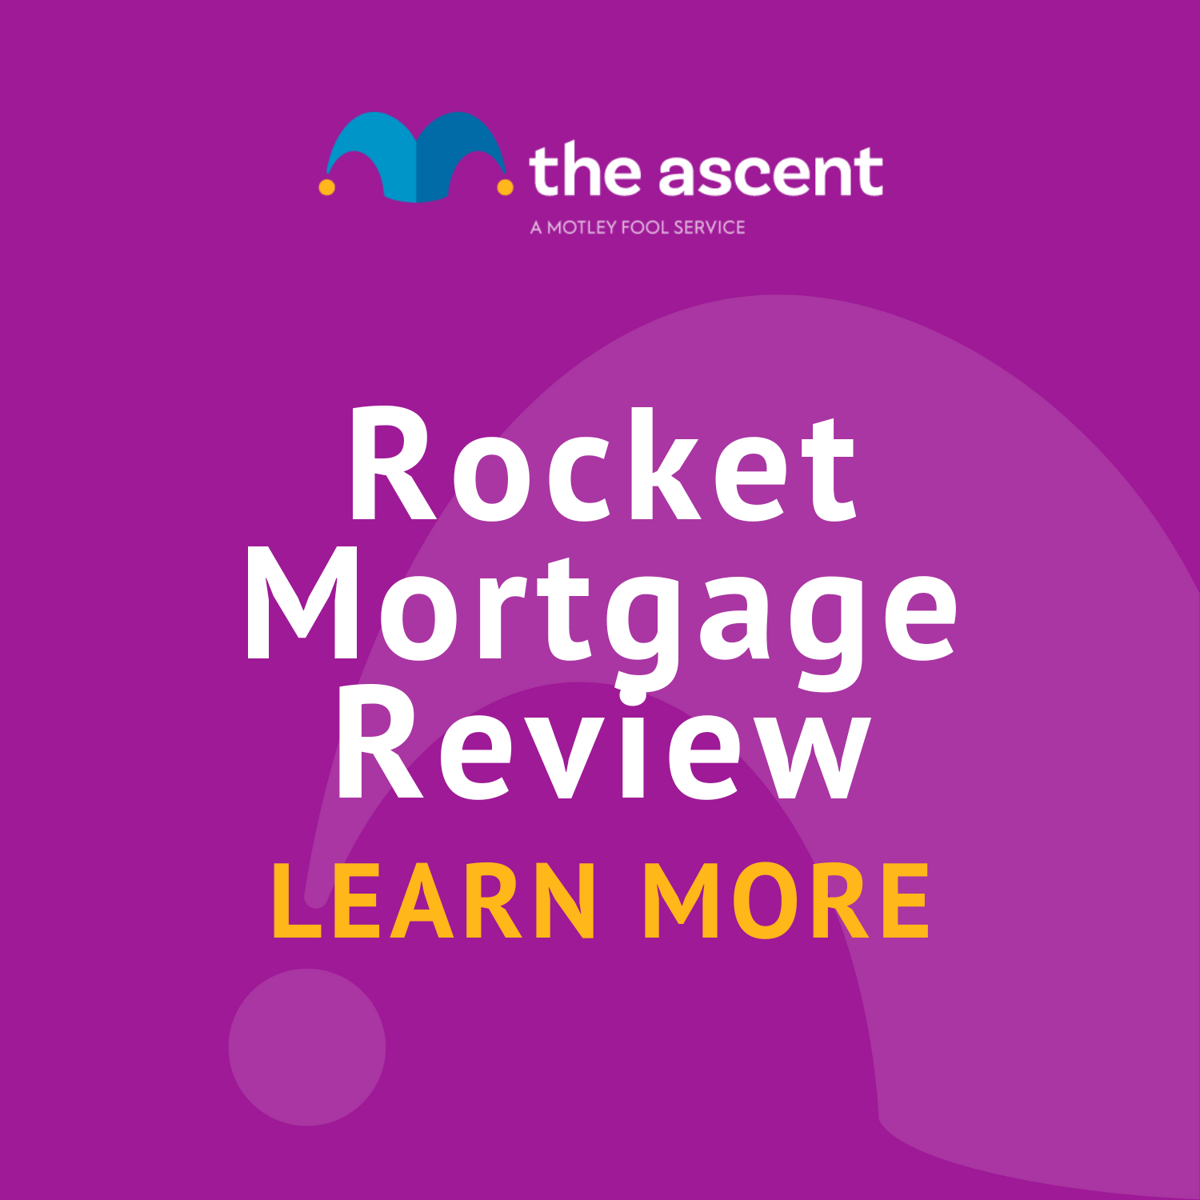 Rocket Mortgage® Review One of the Most Popular for Good Reasons